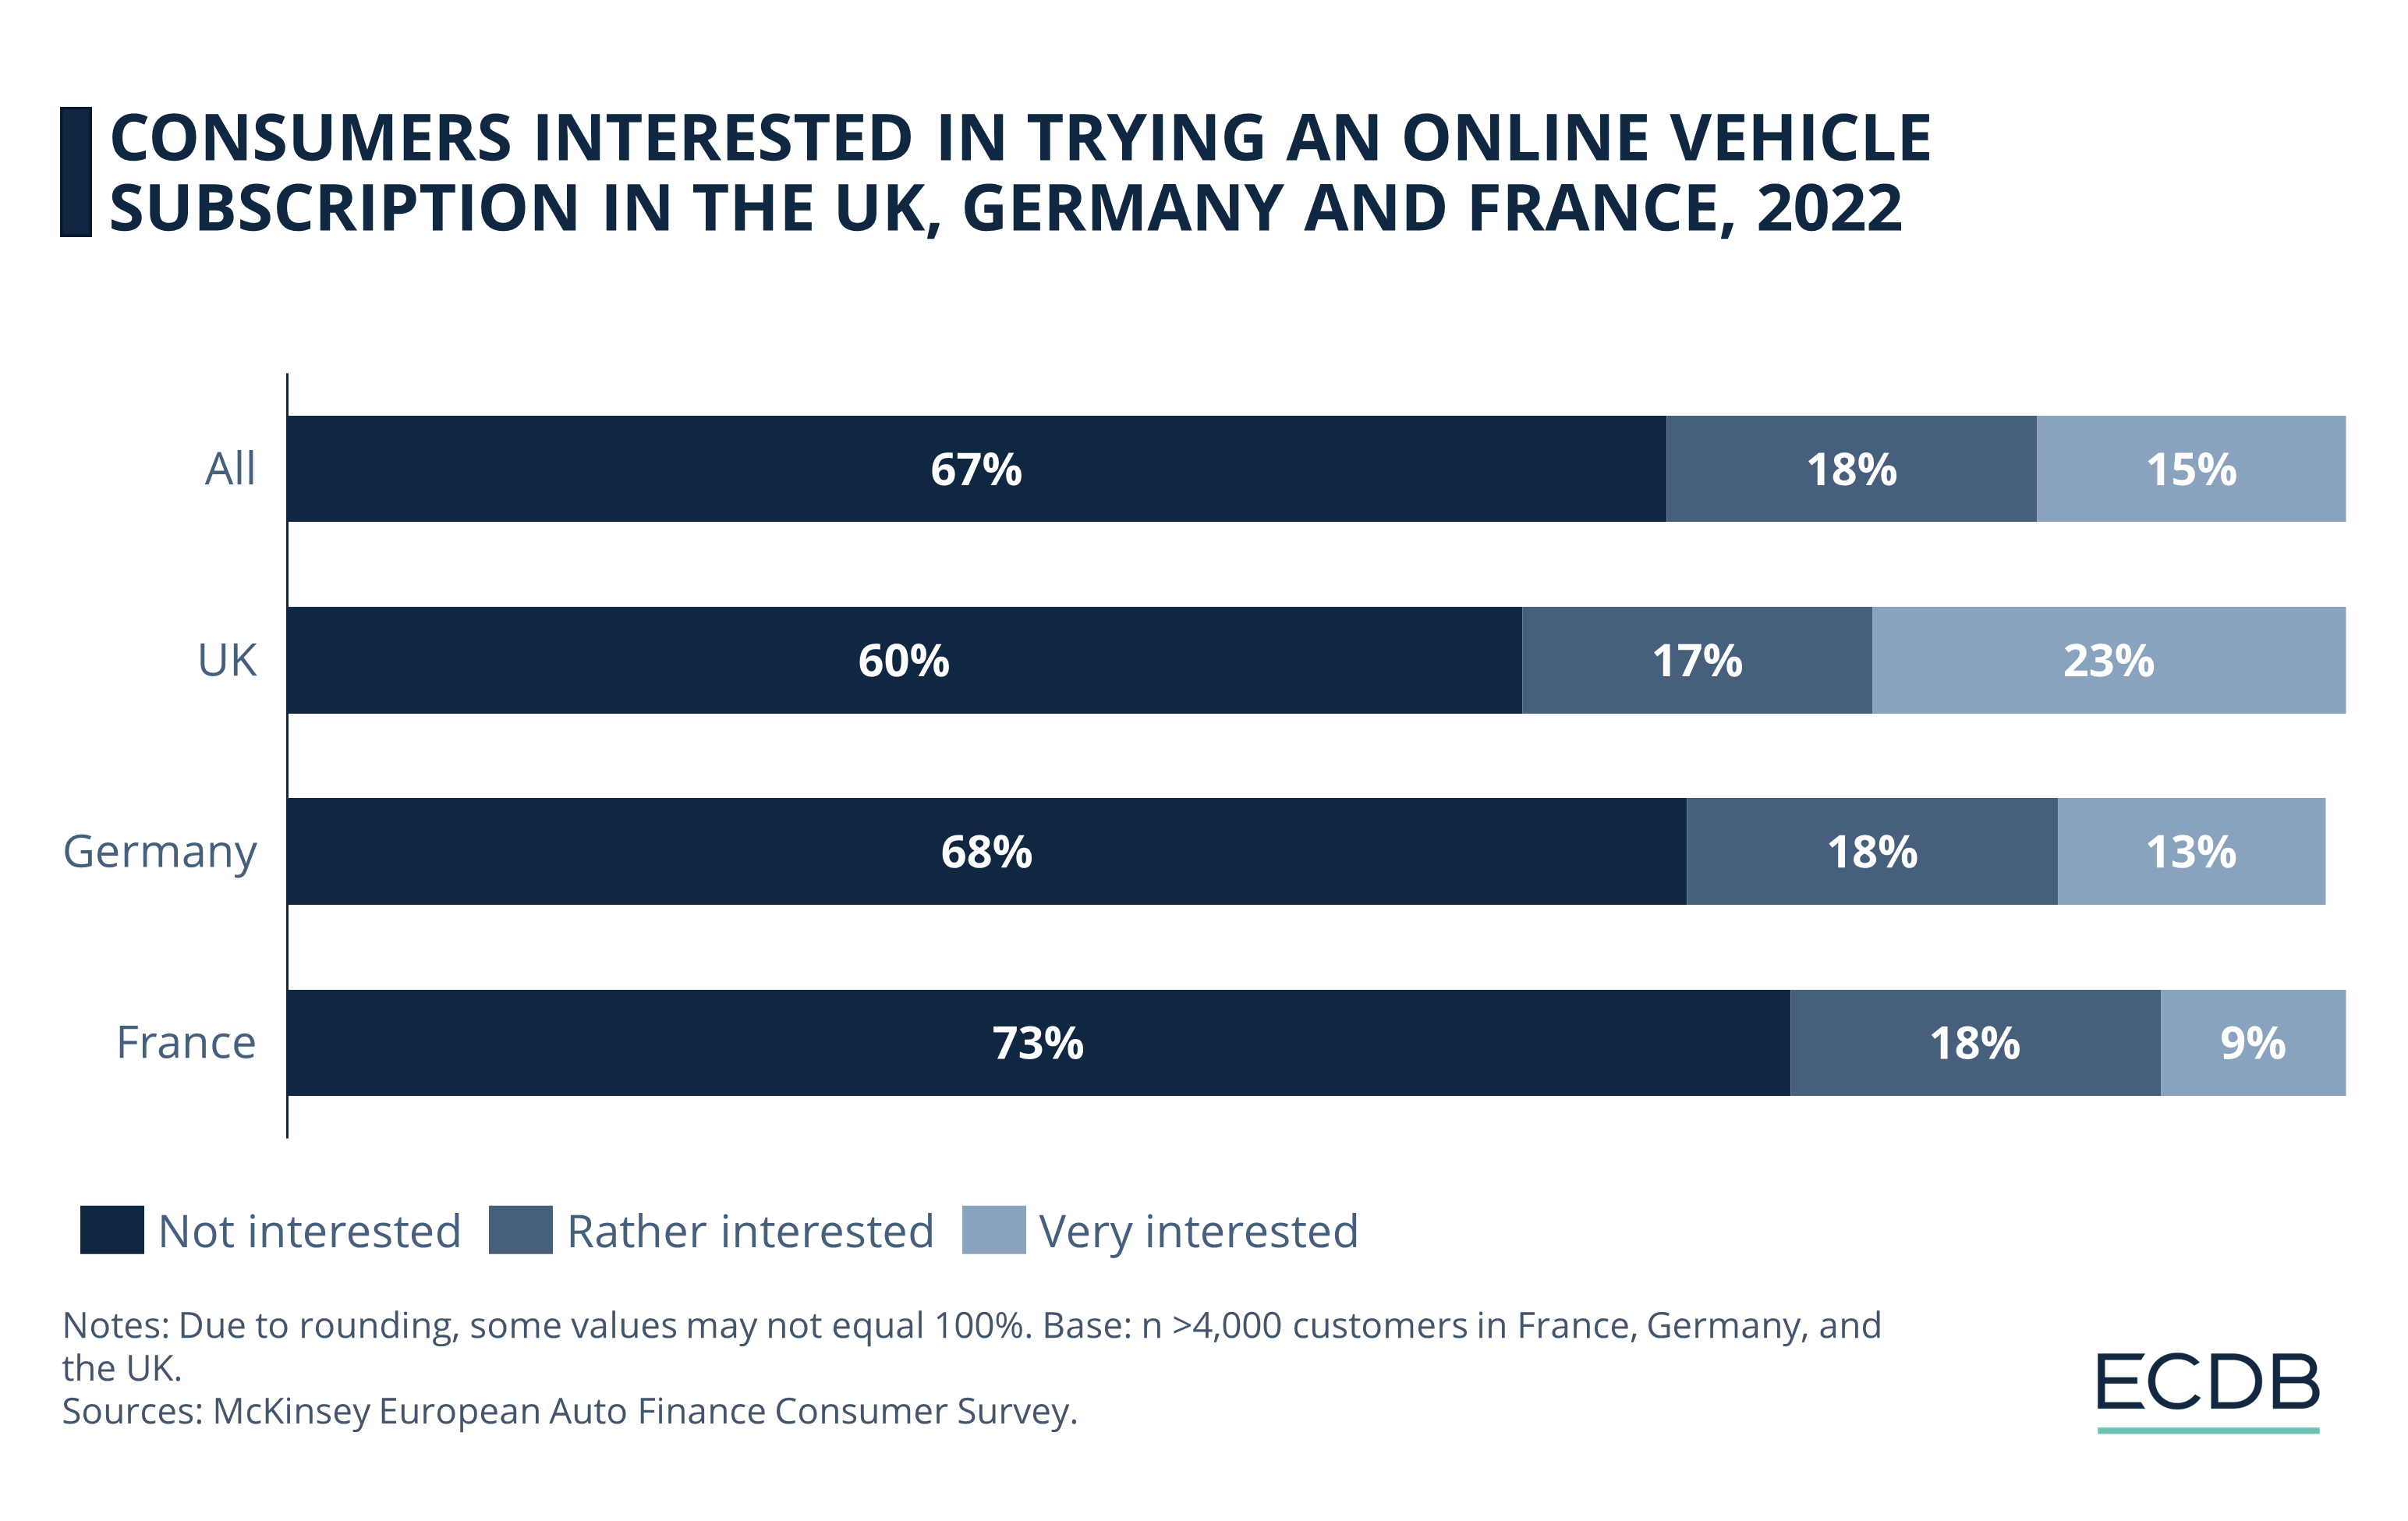 Consumers Interested in Trying an Online Vehicle Subscription in the UK, Germany and France, in 2022